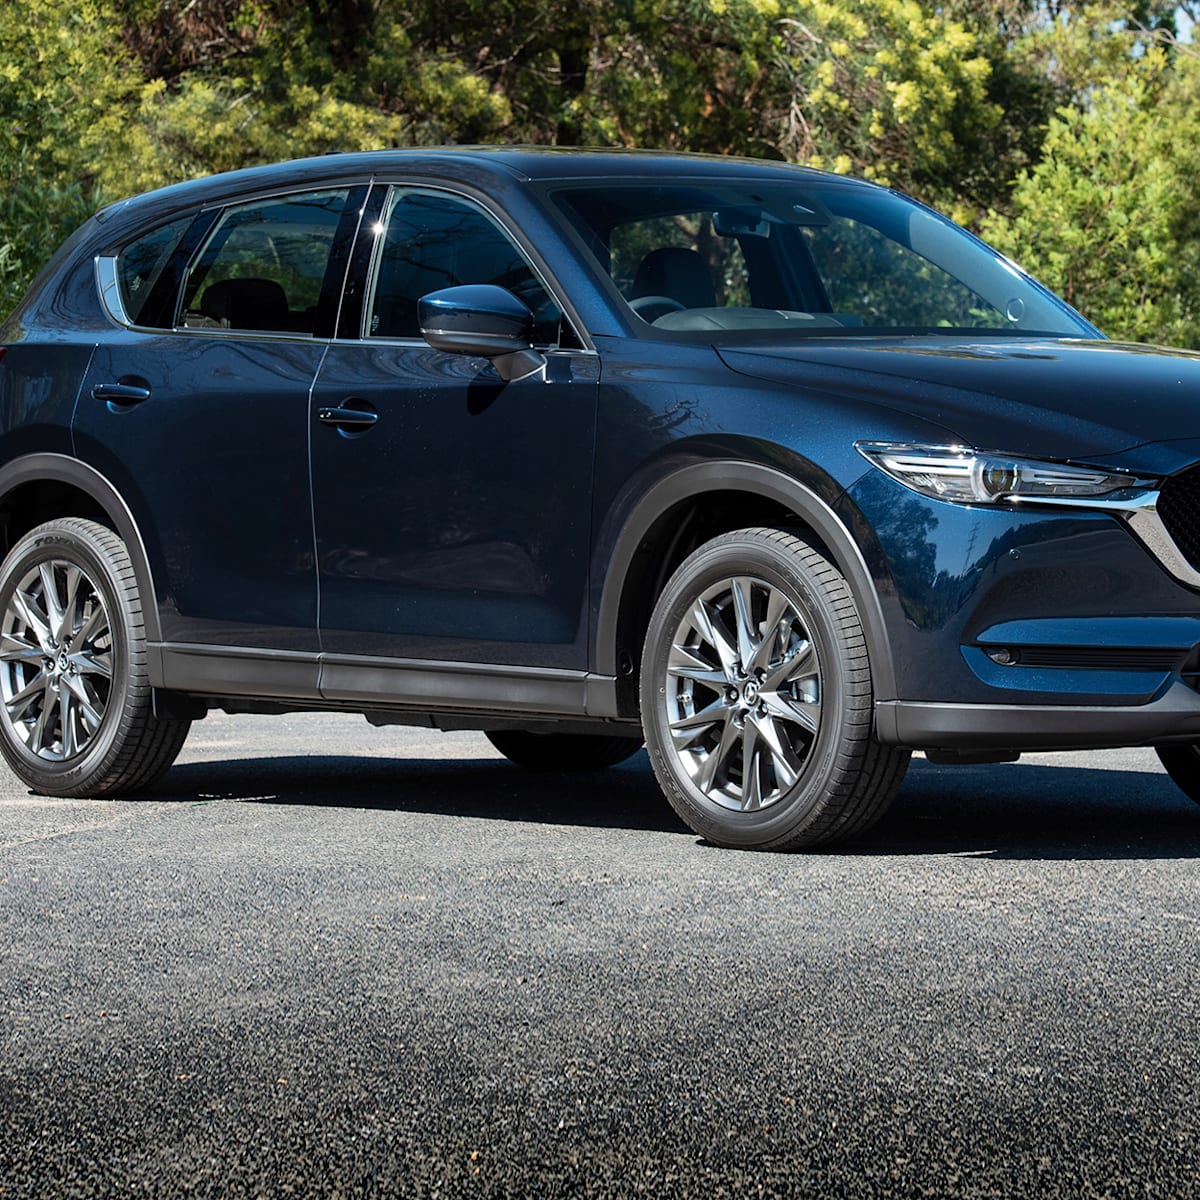 Mazda Cx 5 Puts Music Center Stage With Bose Speakers Inside Mazda